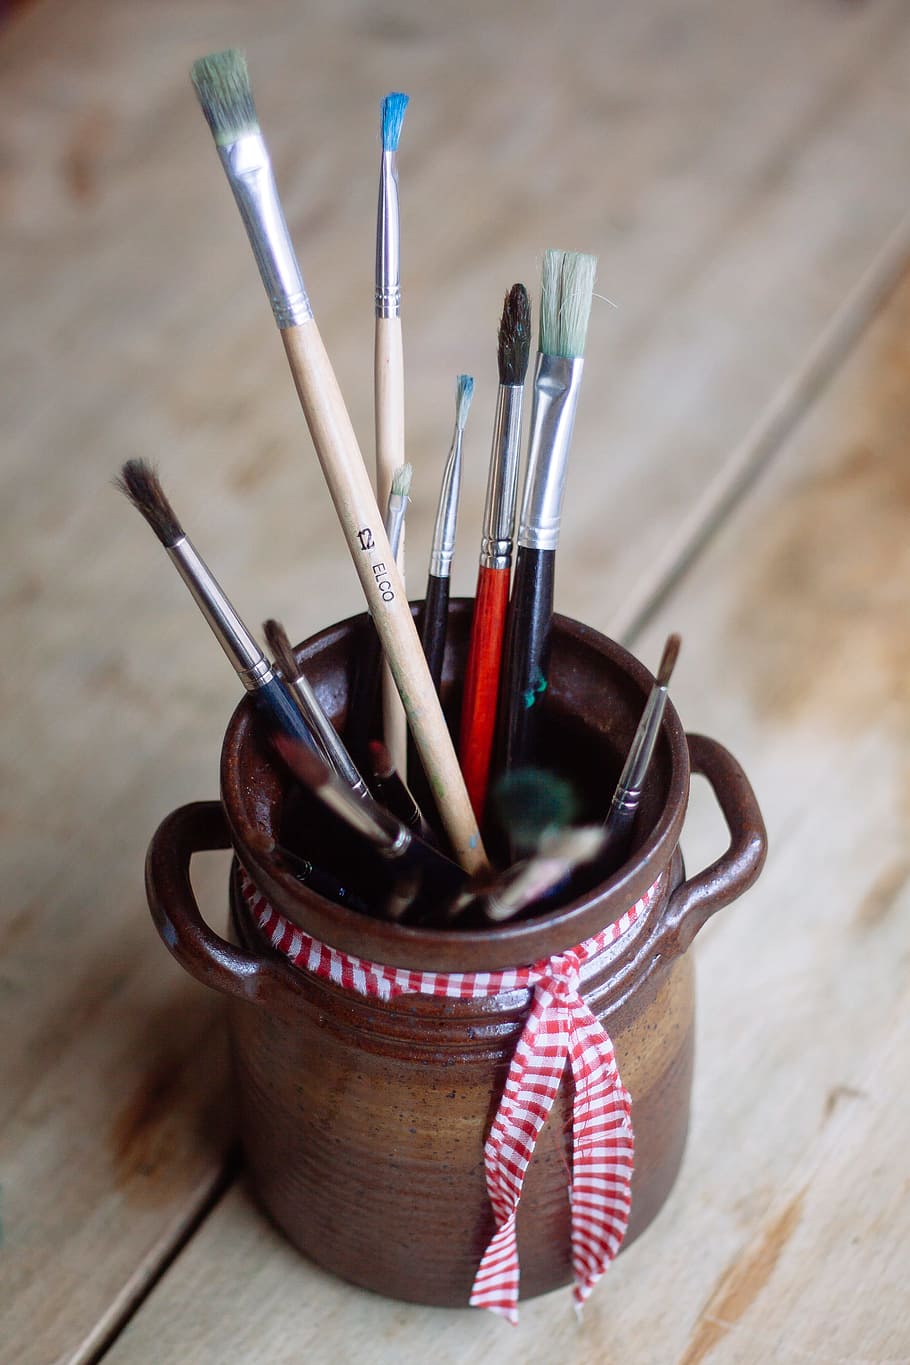 Paint Brushes in Jar, objects, paintbrush, wood - Material, artist